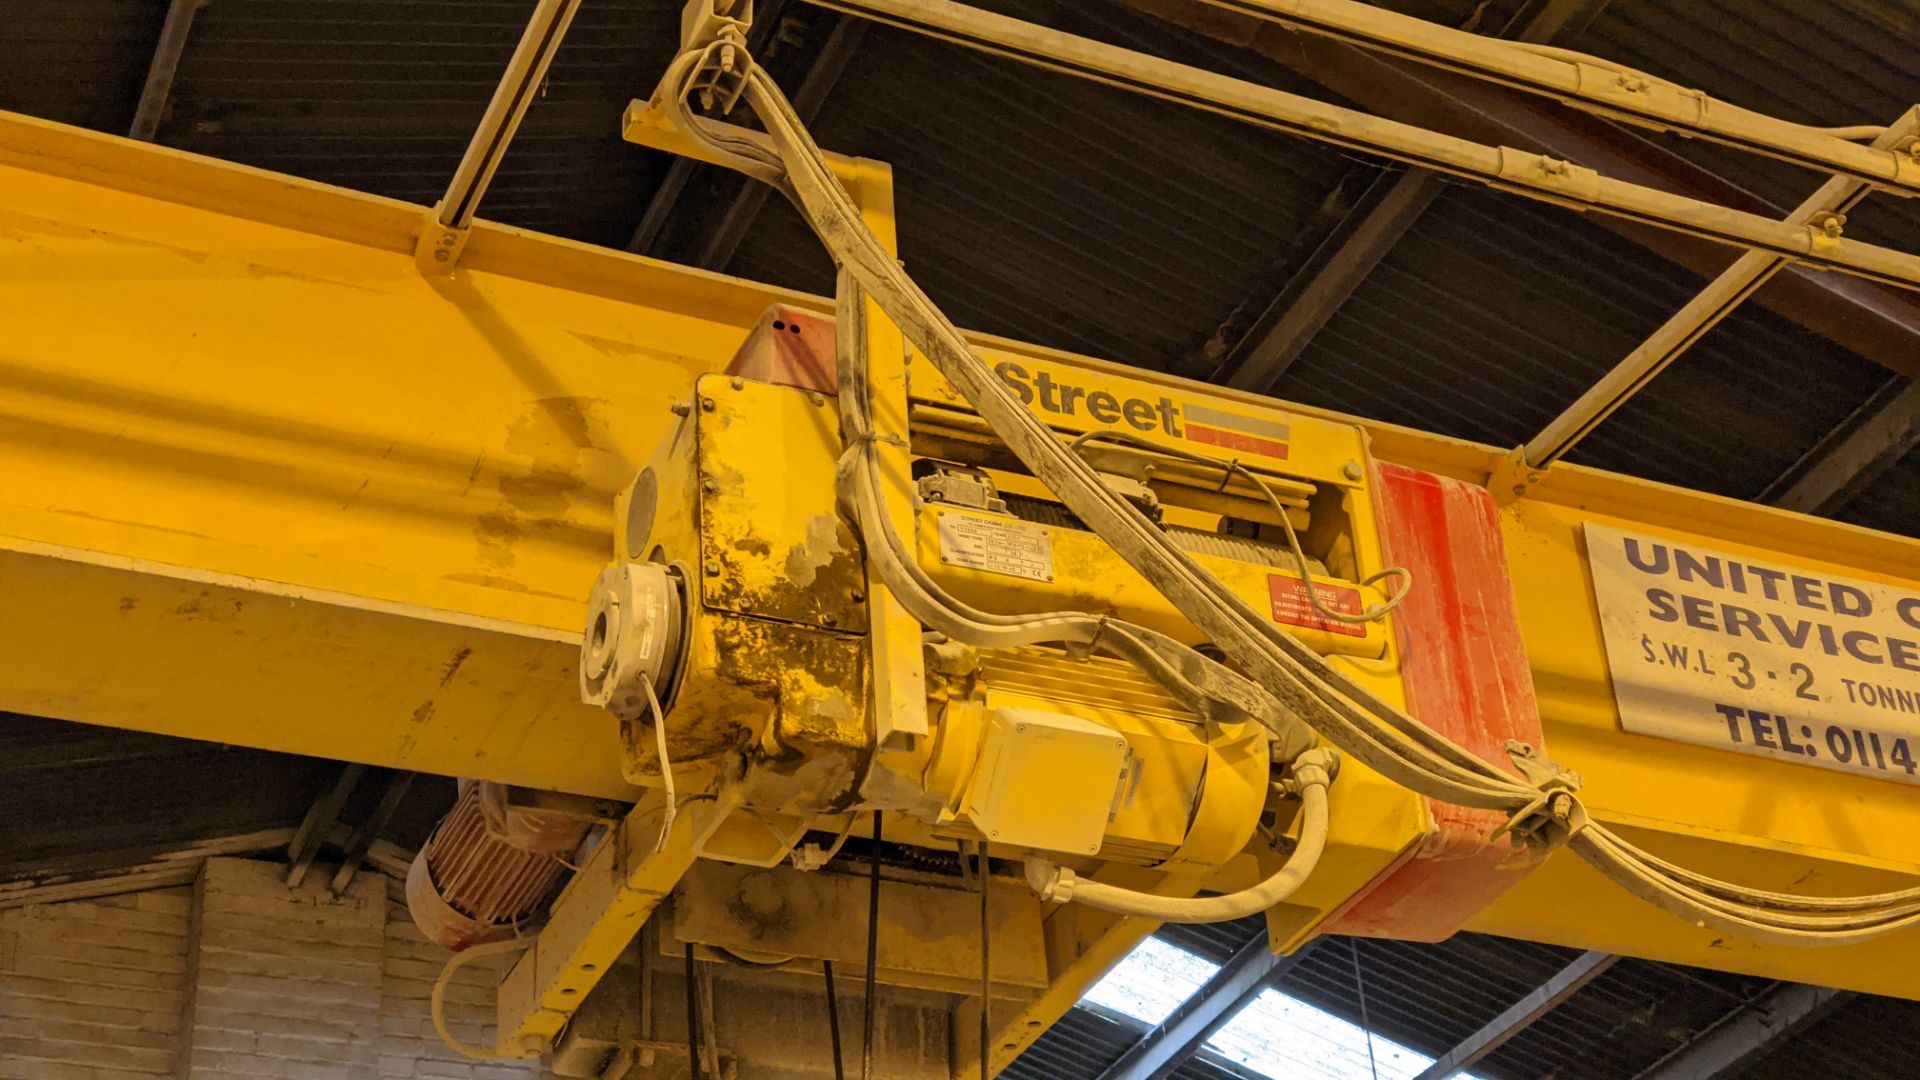 2001 Street overhead travelling crane with 3.2tonne capacity. Serial no. 11006. This lot comprises t - Image 12 of 28